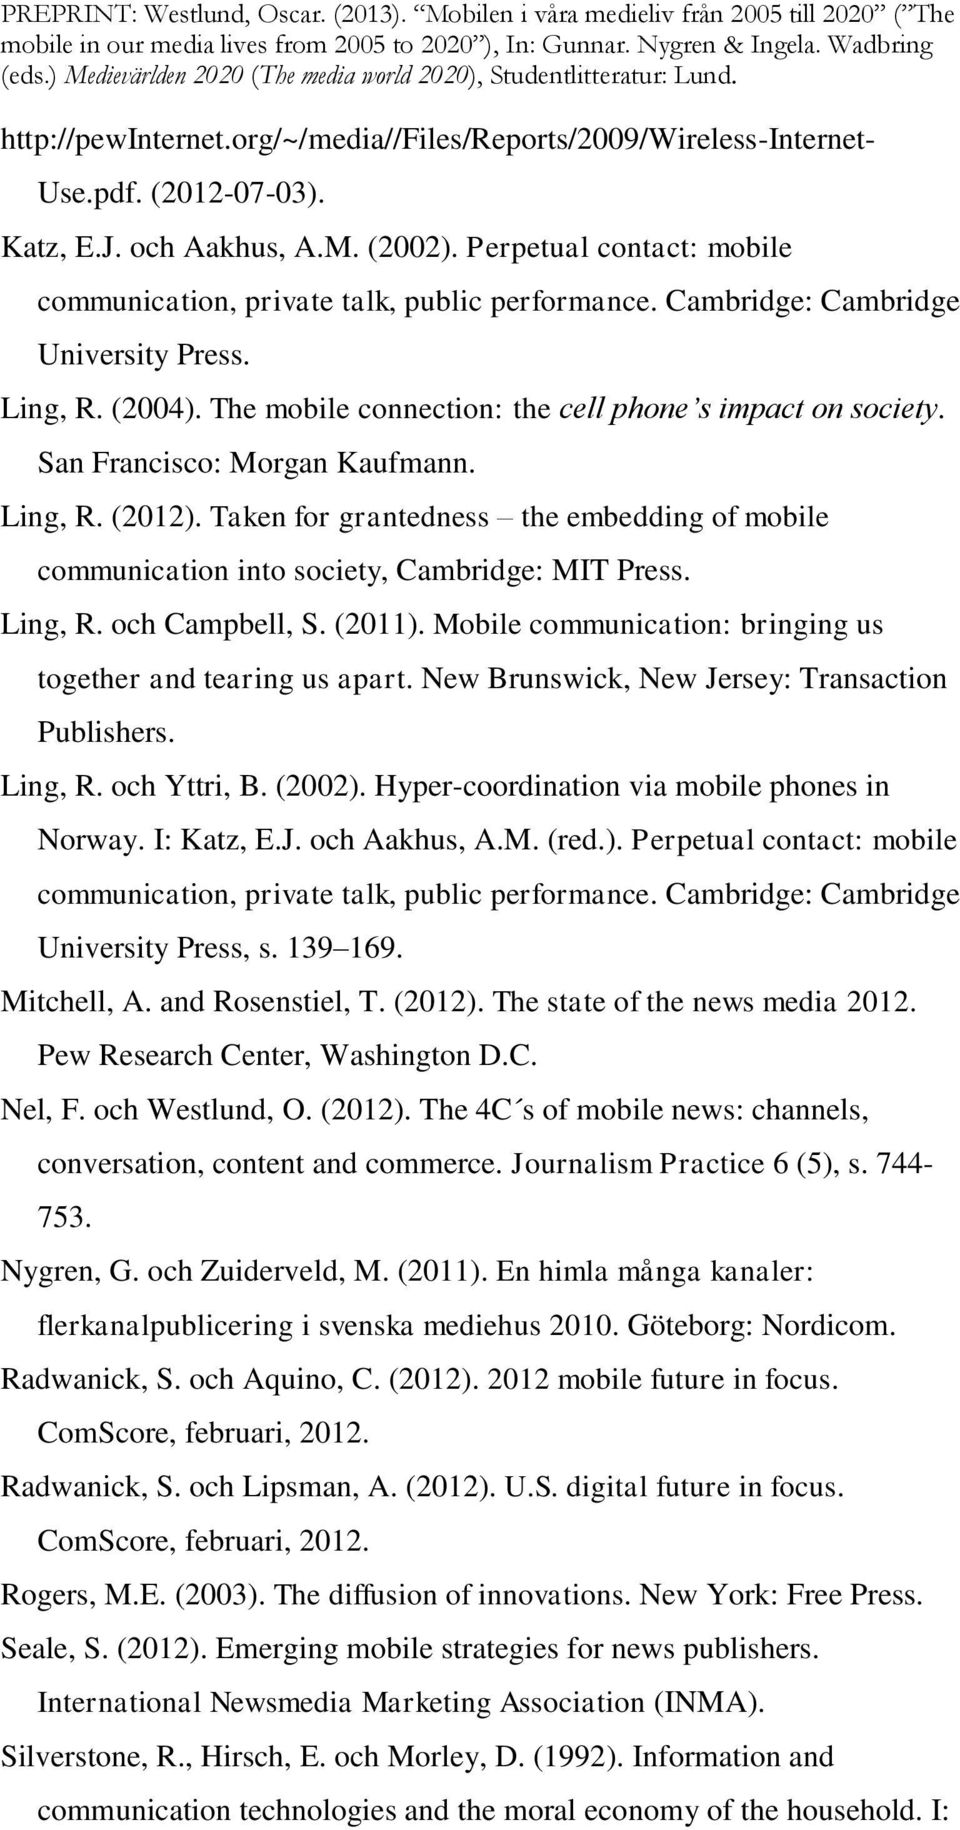 San Francisco: Morgan Kaufmann. Ling, R. (2012). Taken for grantedness the embedding of mobile communication into society, Cambridge: MIT Press. Ling, R. och Campbell, S. (2011).